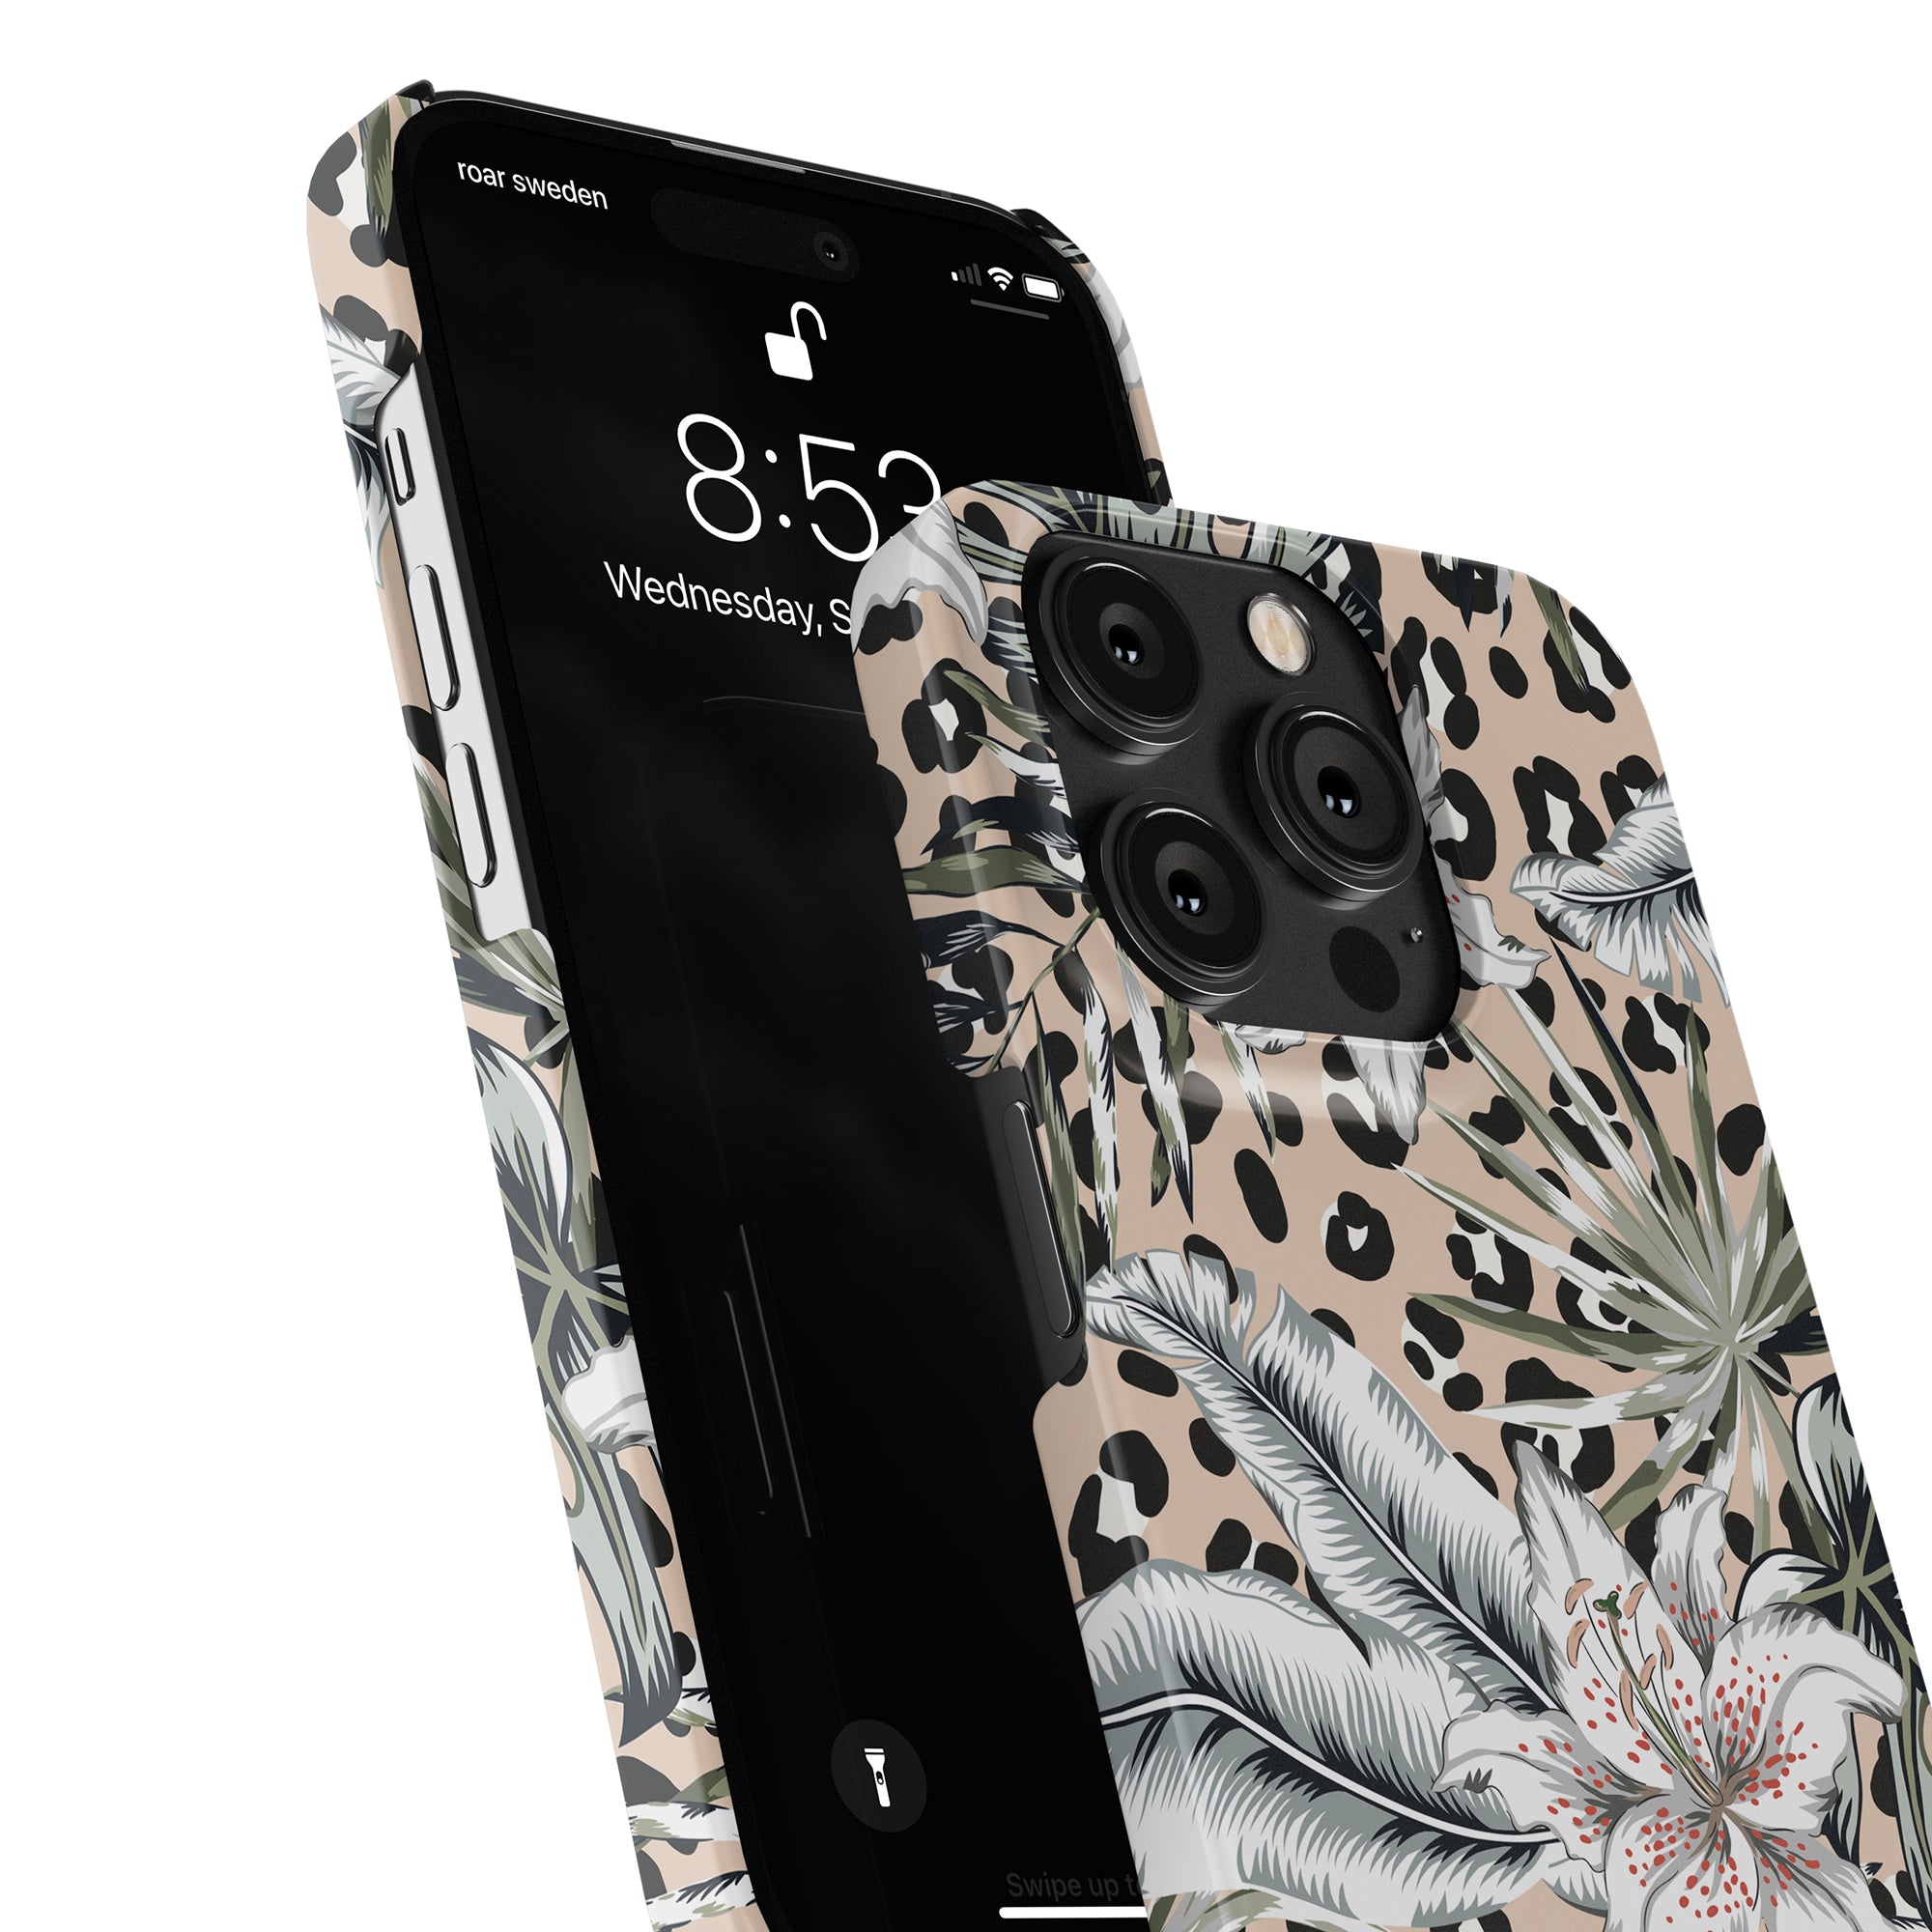 A stylish Senna - Slim case featuring a captivating floral pattern.